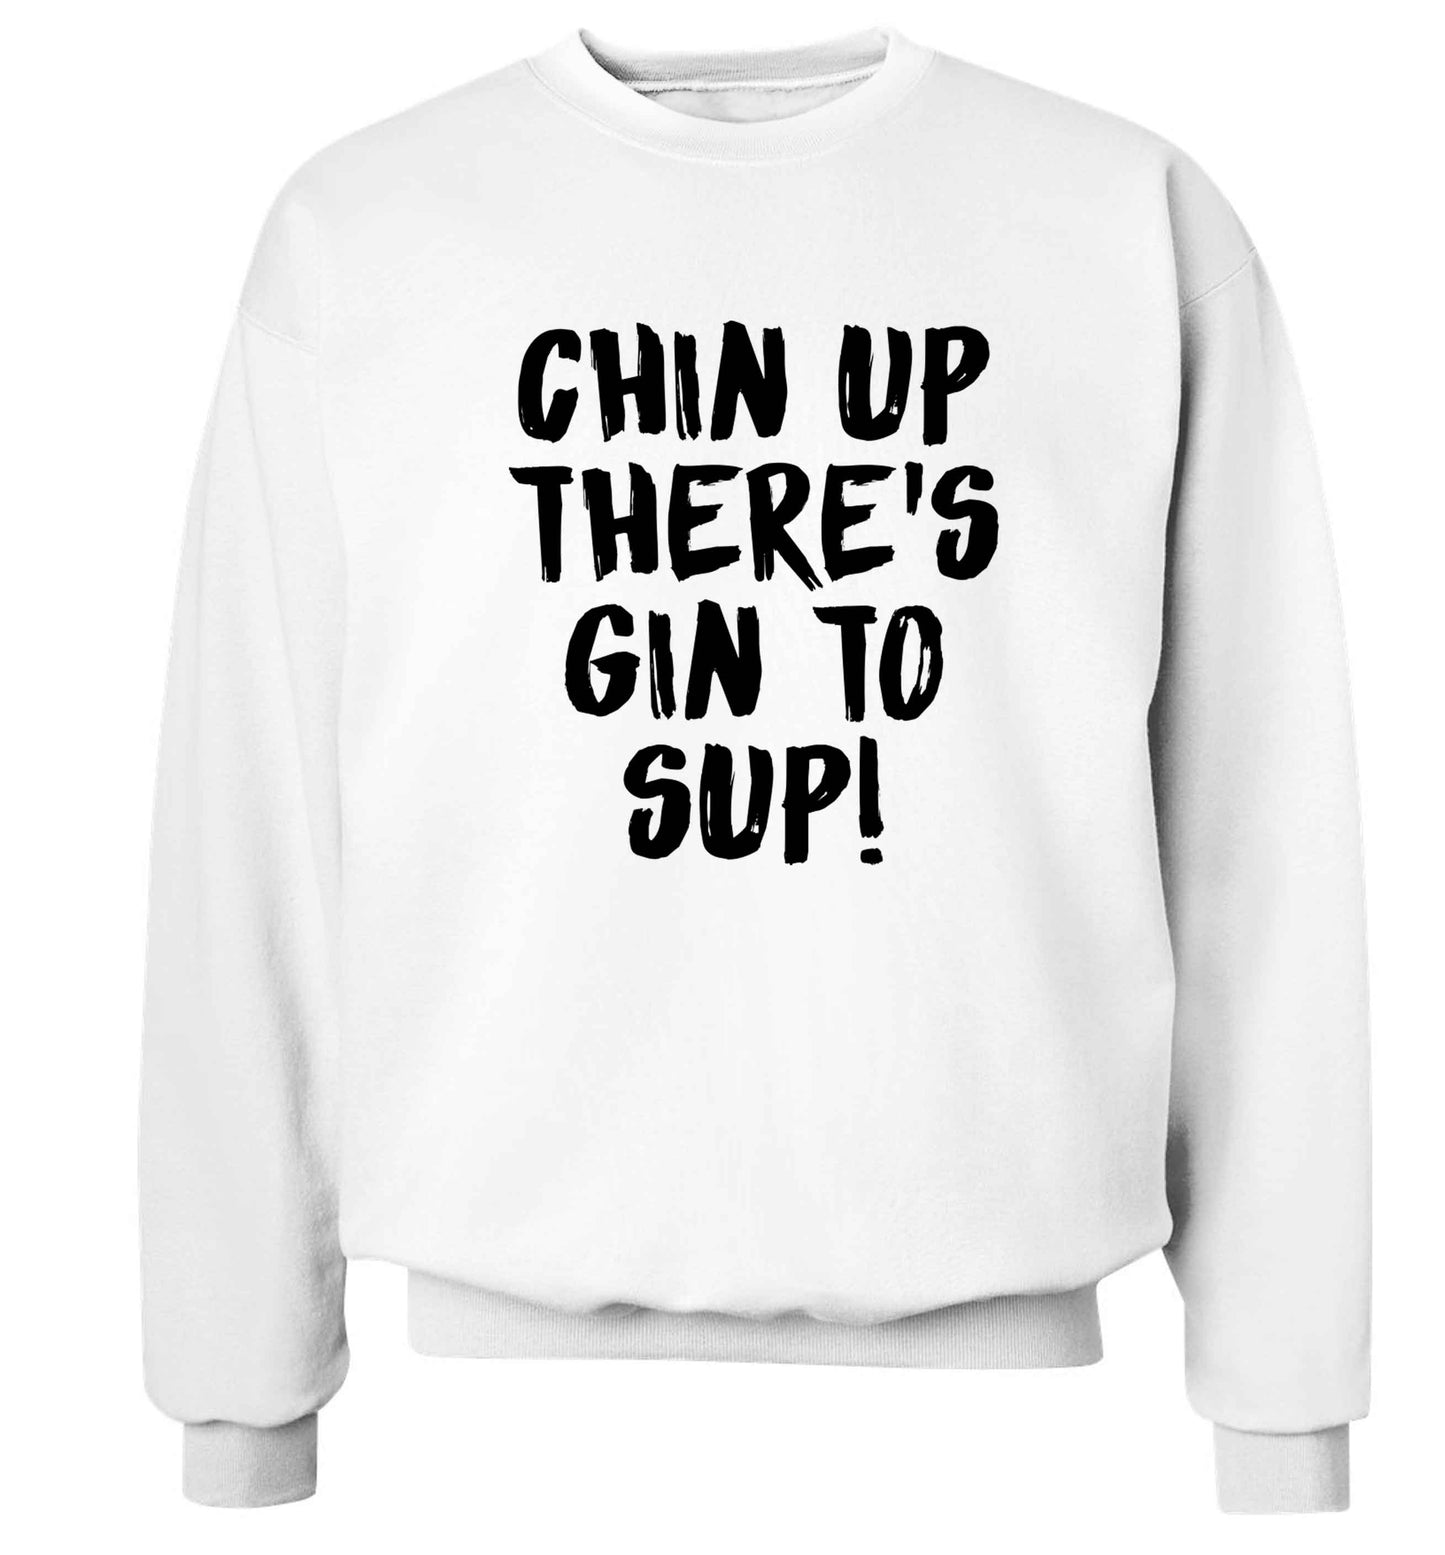 Chin up there's gin to sup Adult's unisex white Sweater 2XL